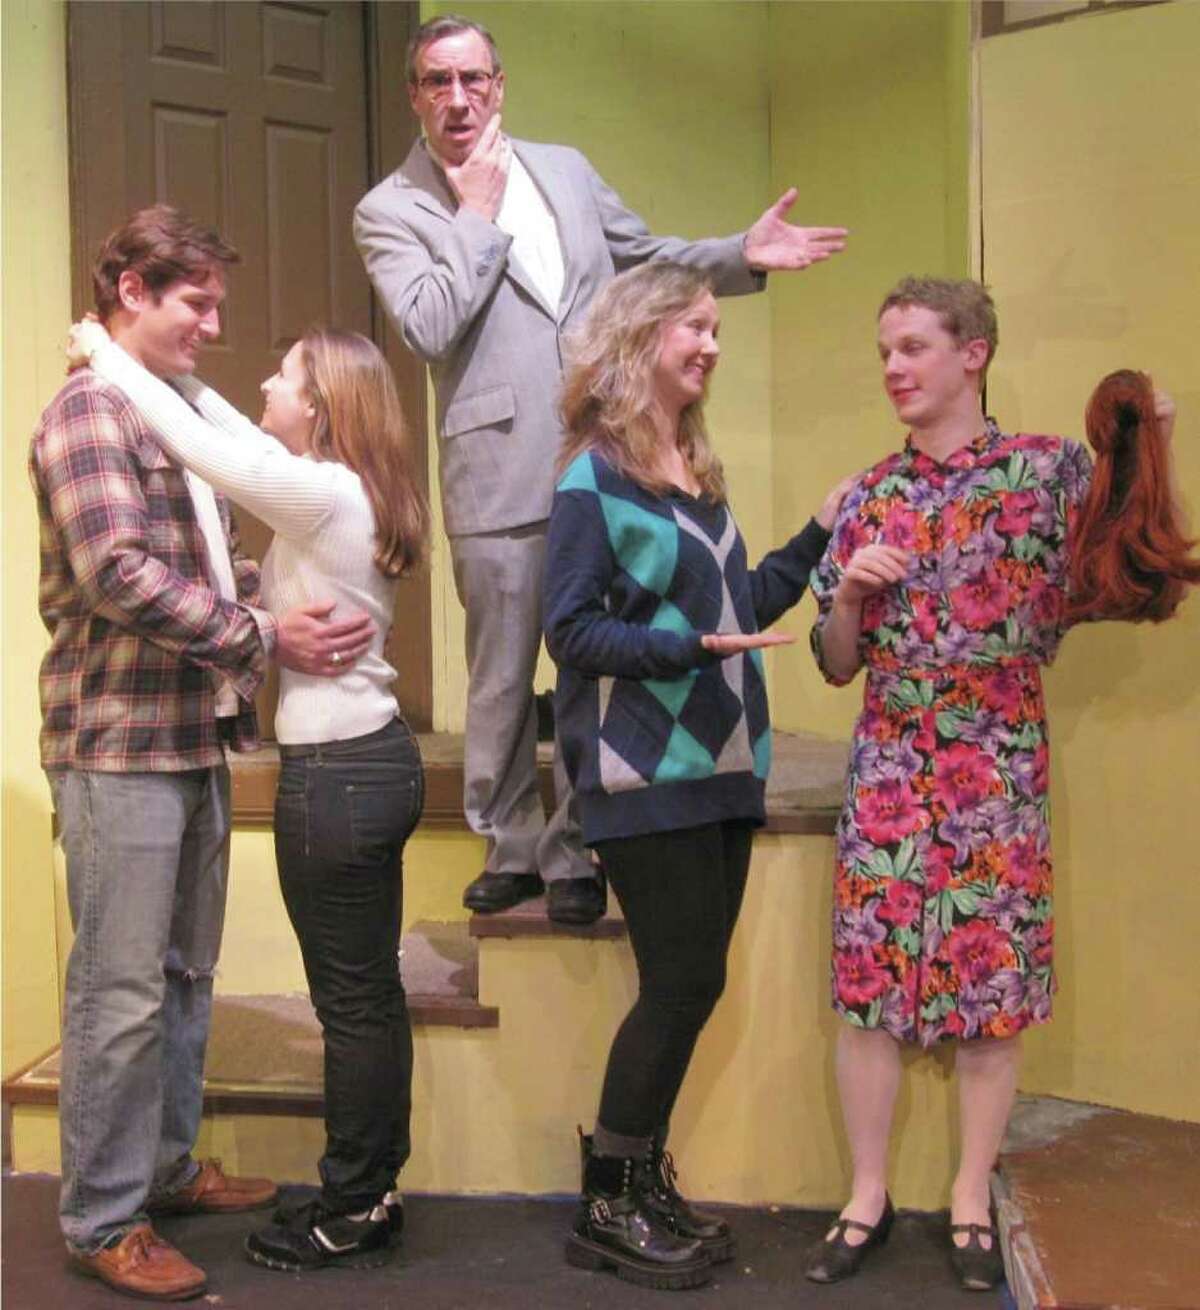 Internal Revenue Service agent Floyd Spinner, played by Bob Filipowich, presides over the happily reunited couples Jon and Kate, played by Townsend Ambrecht and Marta Coppola, and Connie and Leslie, played by Rochelle Woodson and Ryan Hendrickson. For more of the story, see the Town Players of New Canaan’s production of Billy VanZandt and Jane Milmore's comedy 'Love, Sex and the I.R.S.,' playing Feb. 25 to March 12 at the Powerhouse Theatre in Waveny Park, New Canaan. To reserve seats, call 203-966-7371. Contributed photo/Cindy Ording